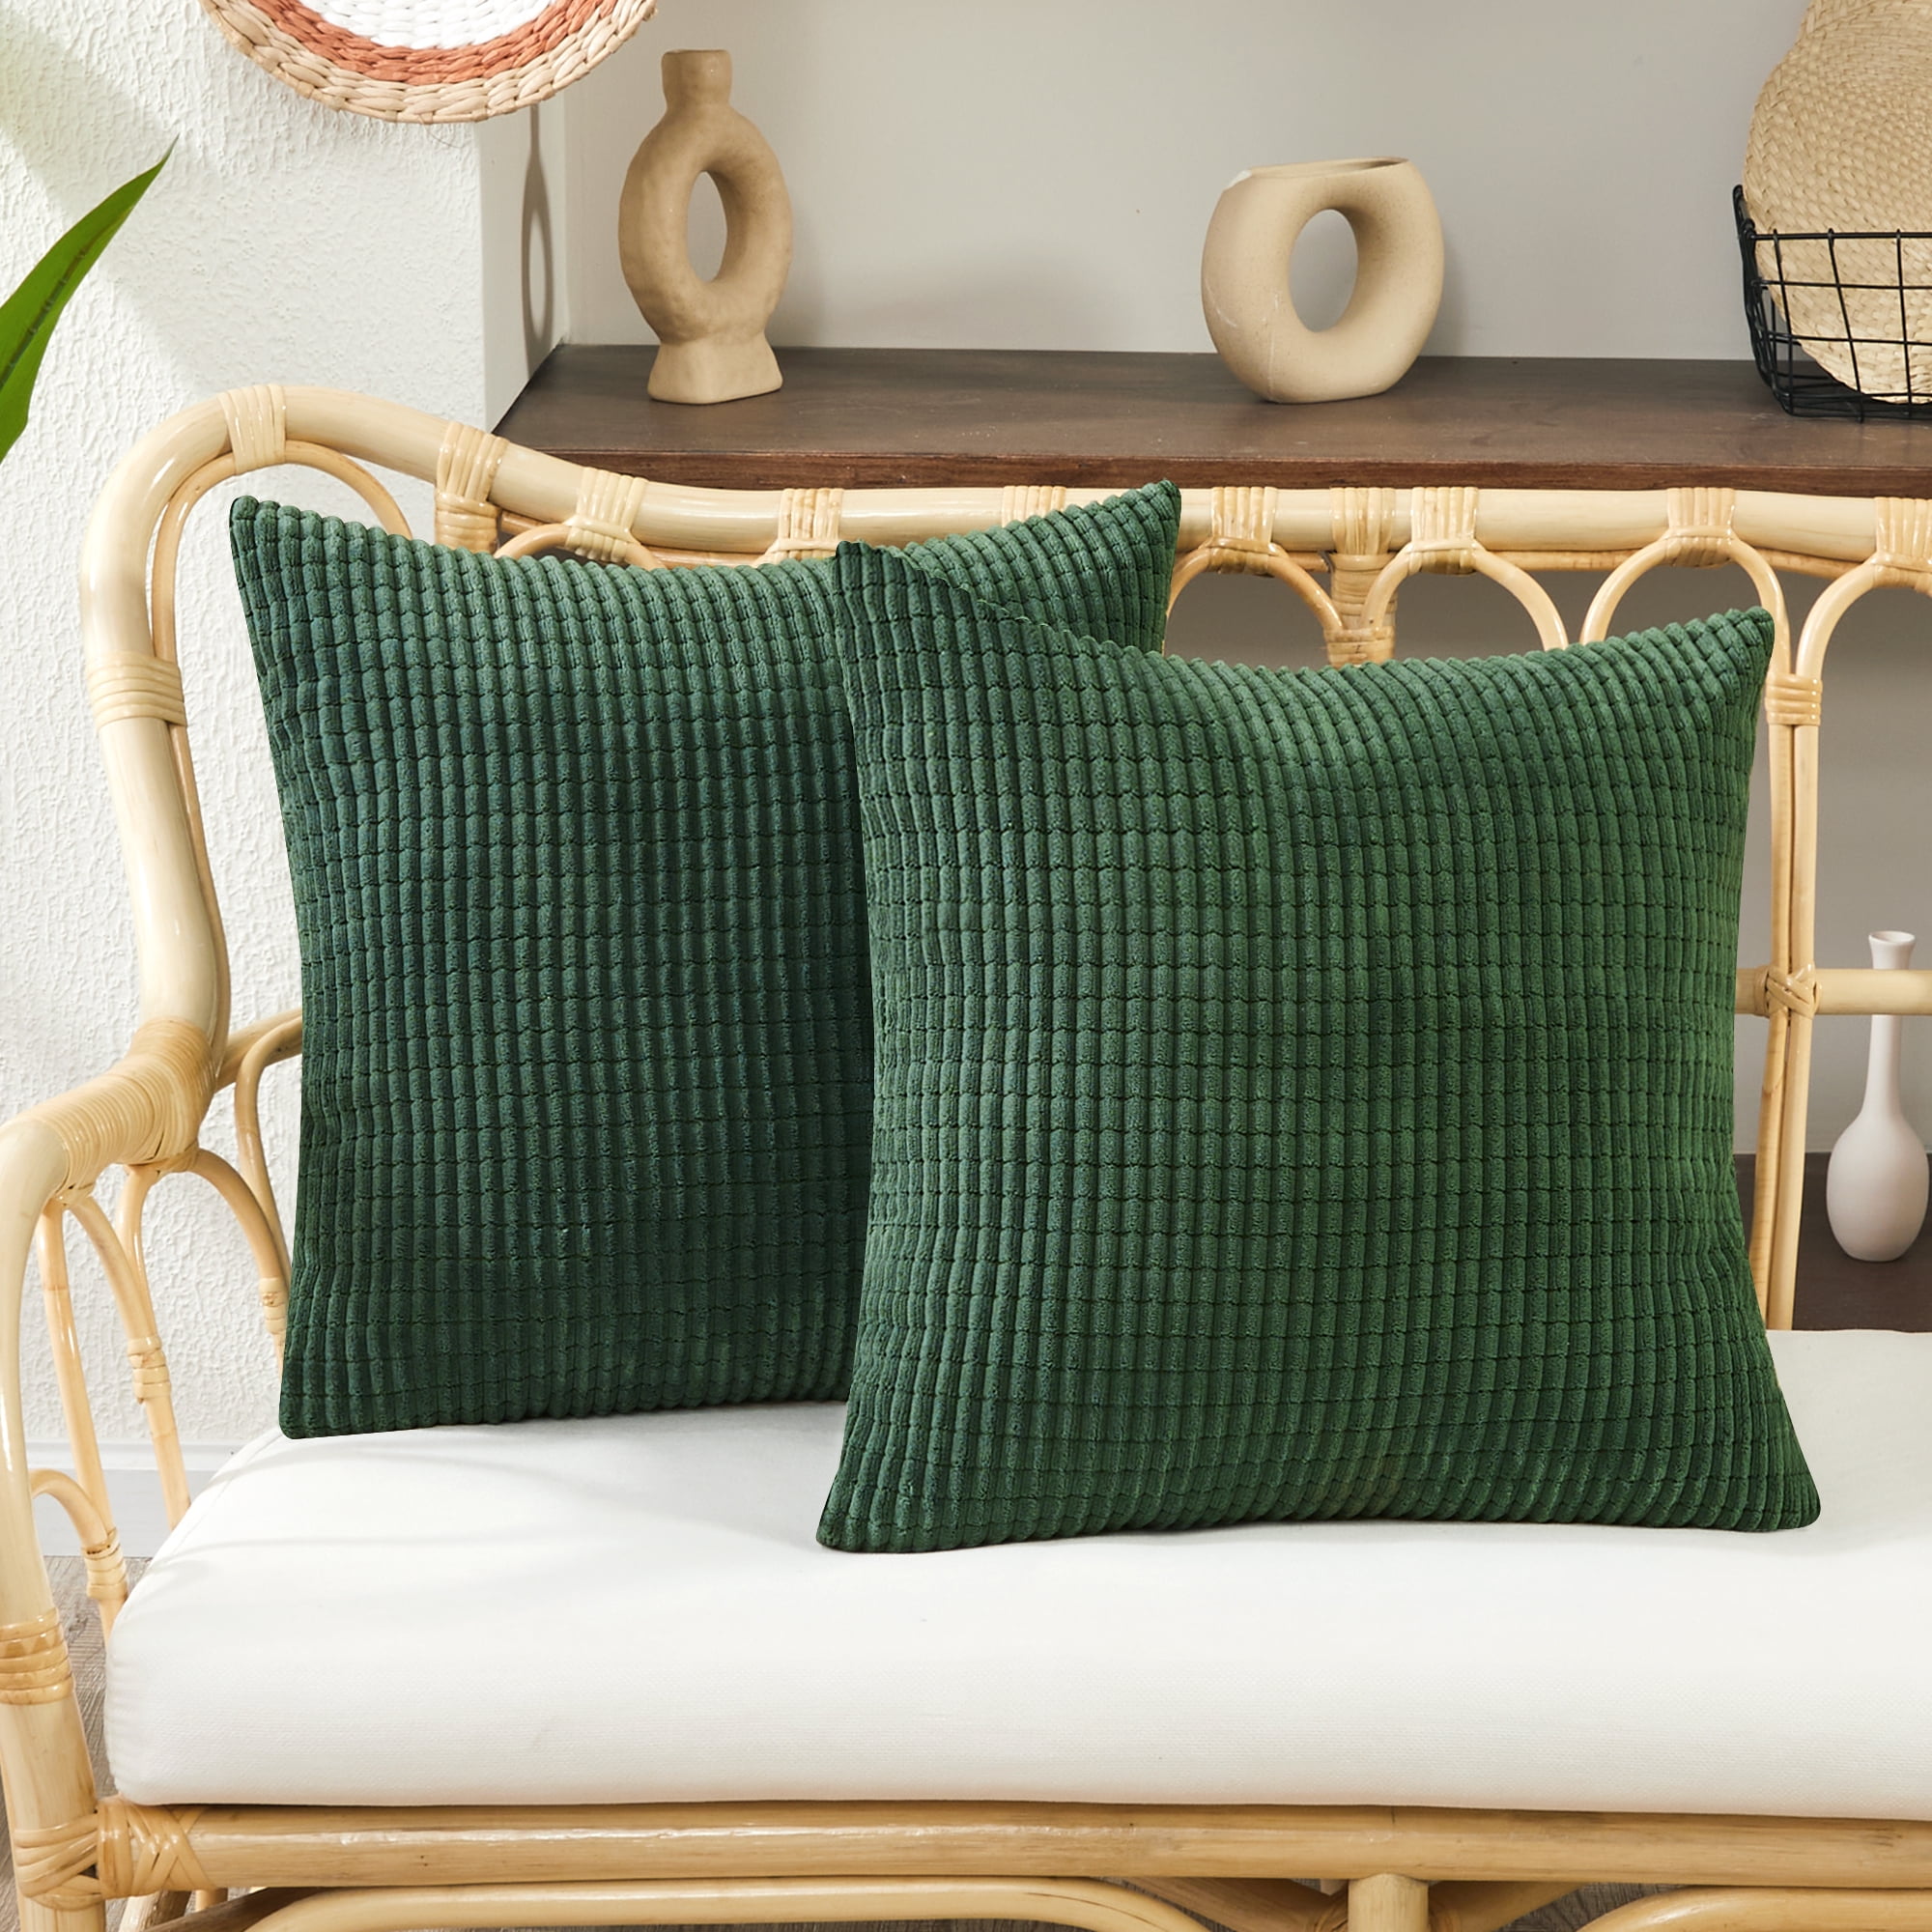 Home Brilliant Large Throw Pillow covers for Living Room Striped Plush  green corduroy Pillow covers for Spring Travel, 24 x 24 I